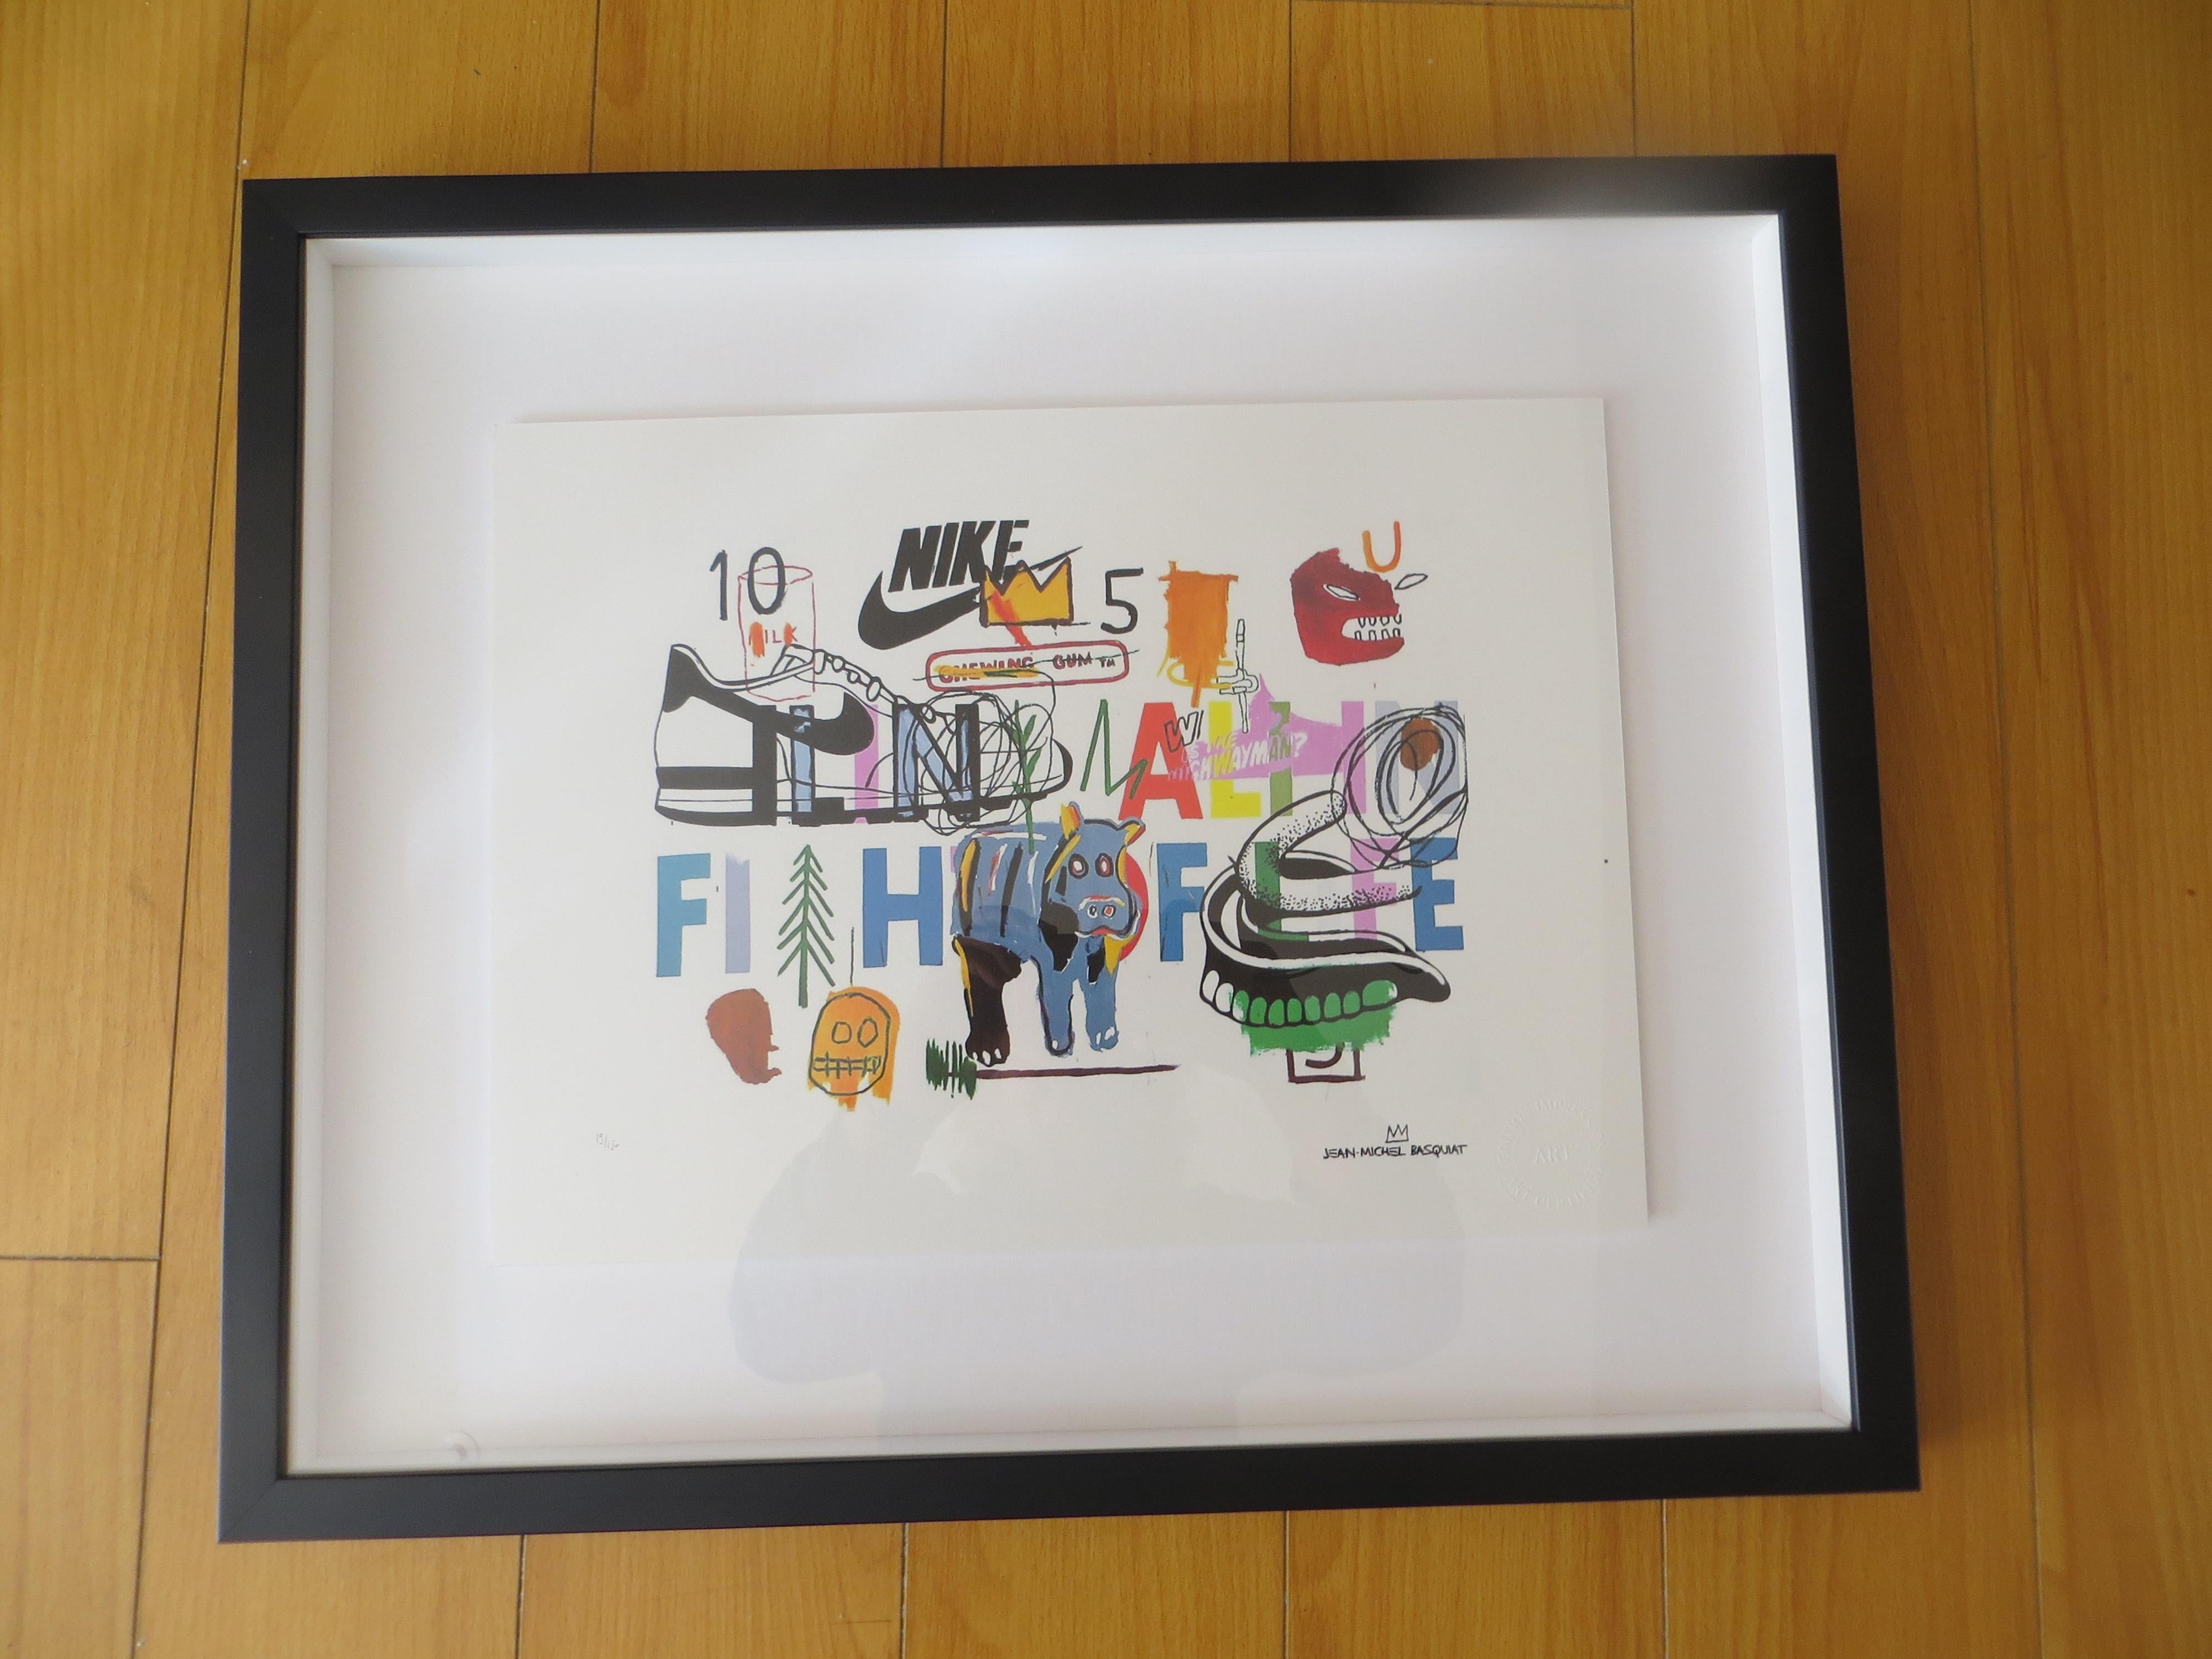 JM Basquiat And  Andy Warhol Collaboration  Lithograph numbered 19/150 
The Visual Language of Collaboration
Looking at the pieces the two artists were making together, it is easy to think of a conversation through painting. There is a strong sense